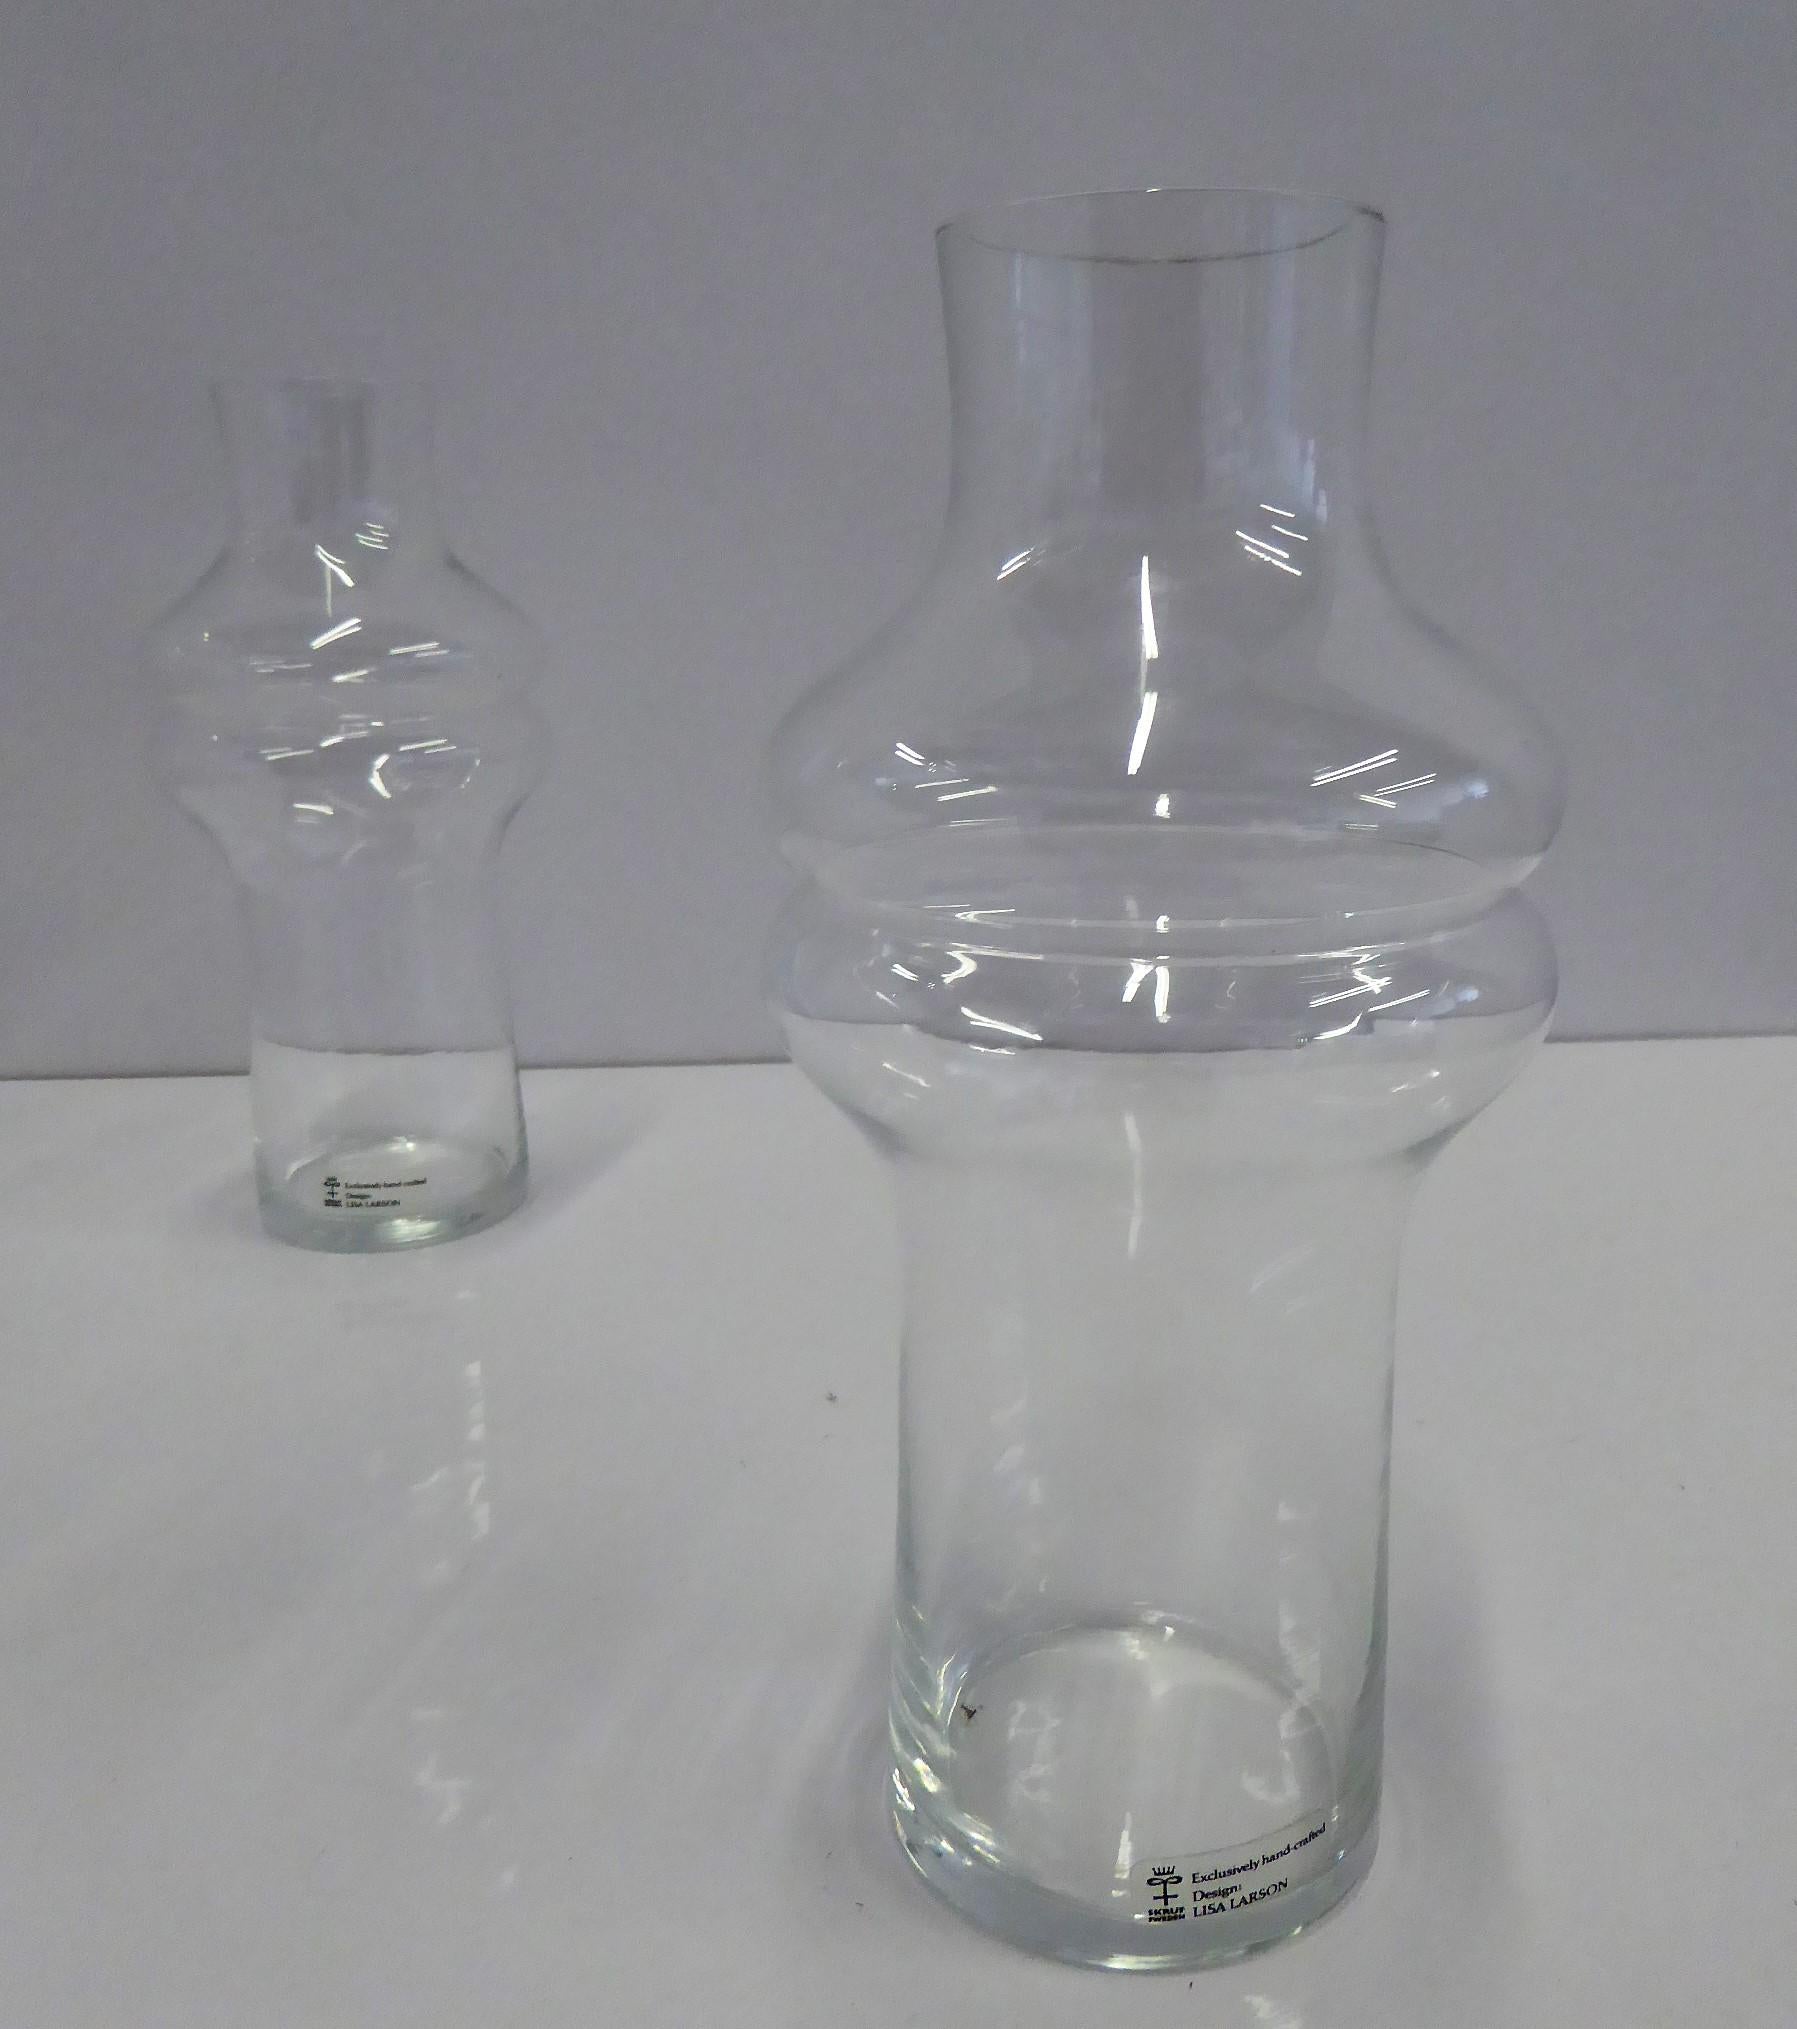 Swedish Modern pair of handcrafted clear double shouldered glass vases by Lisa Larson for Skruf from the 1980s. These are new old stock, never used vases so they're in excellent condition and since they are handcrafted, there are minor variations in